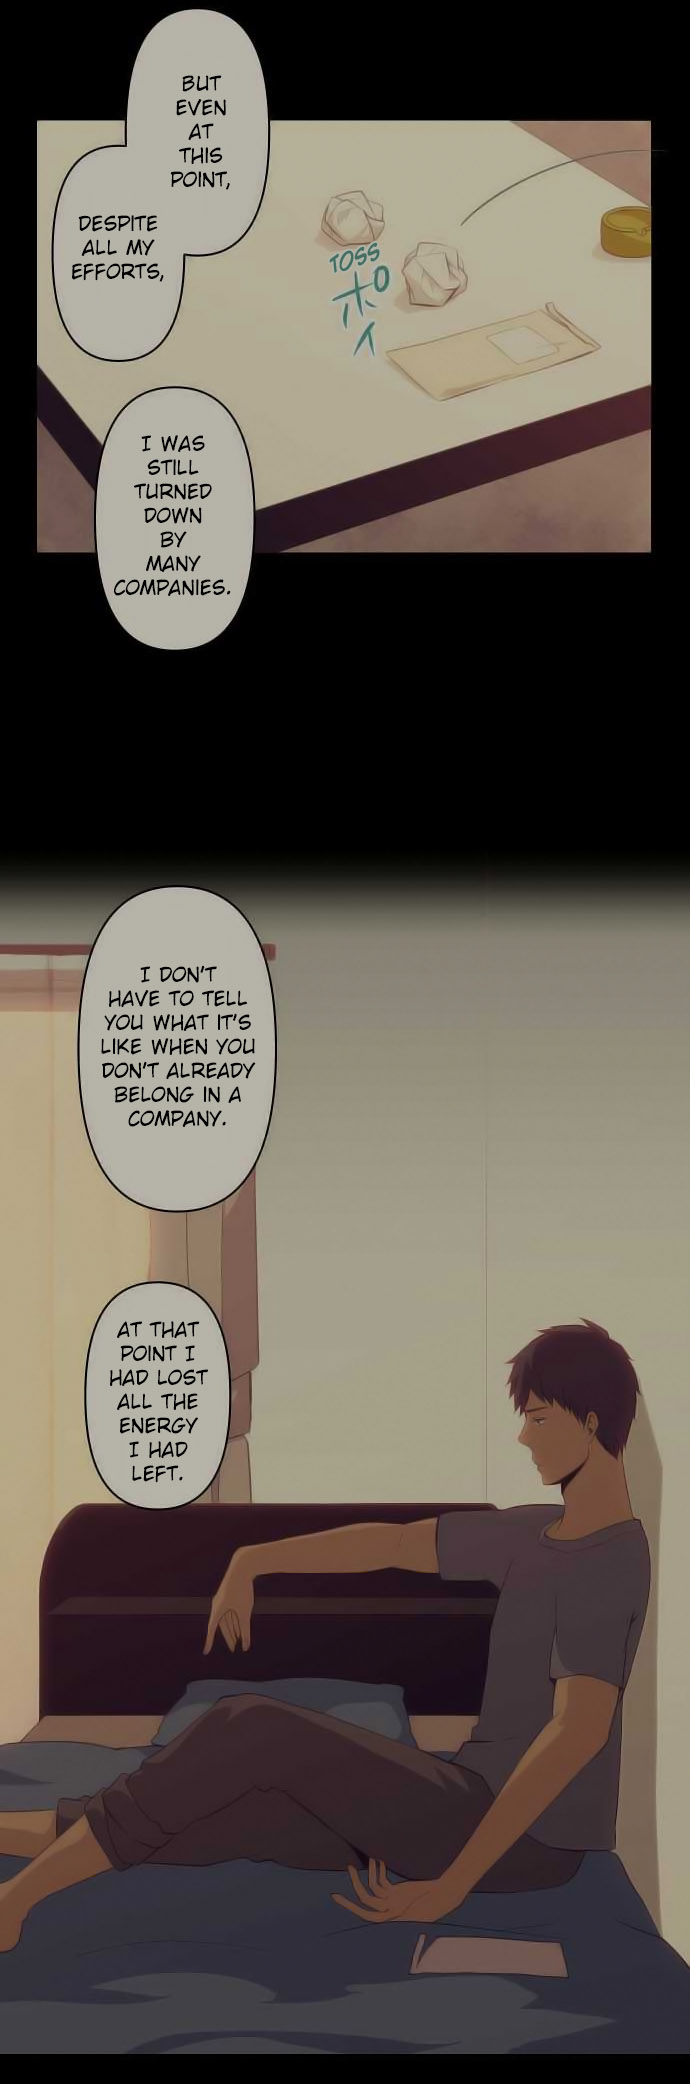 ReLIFE Ch.91